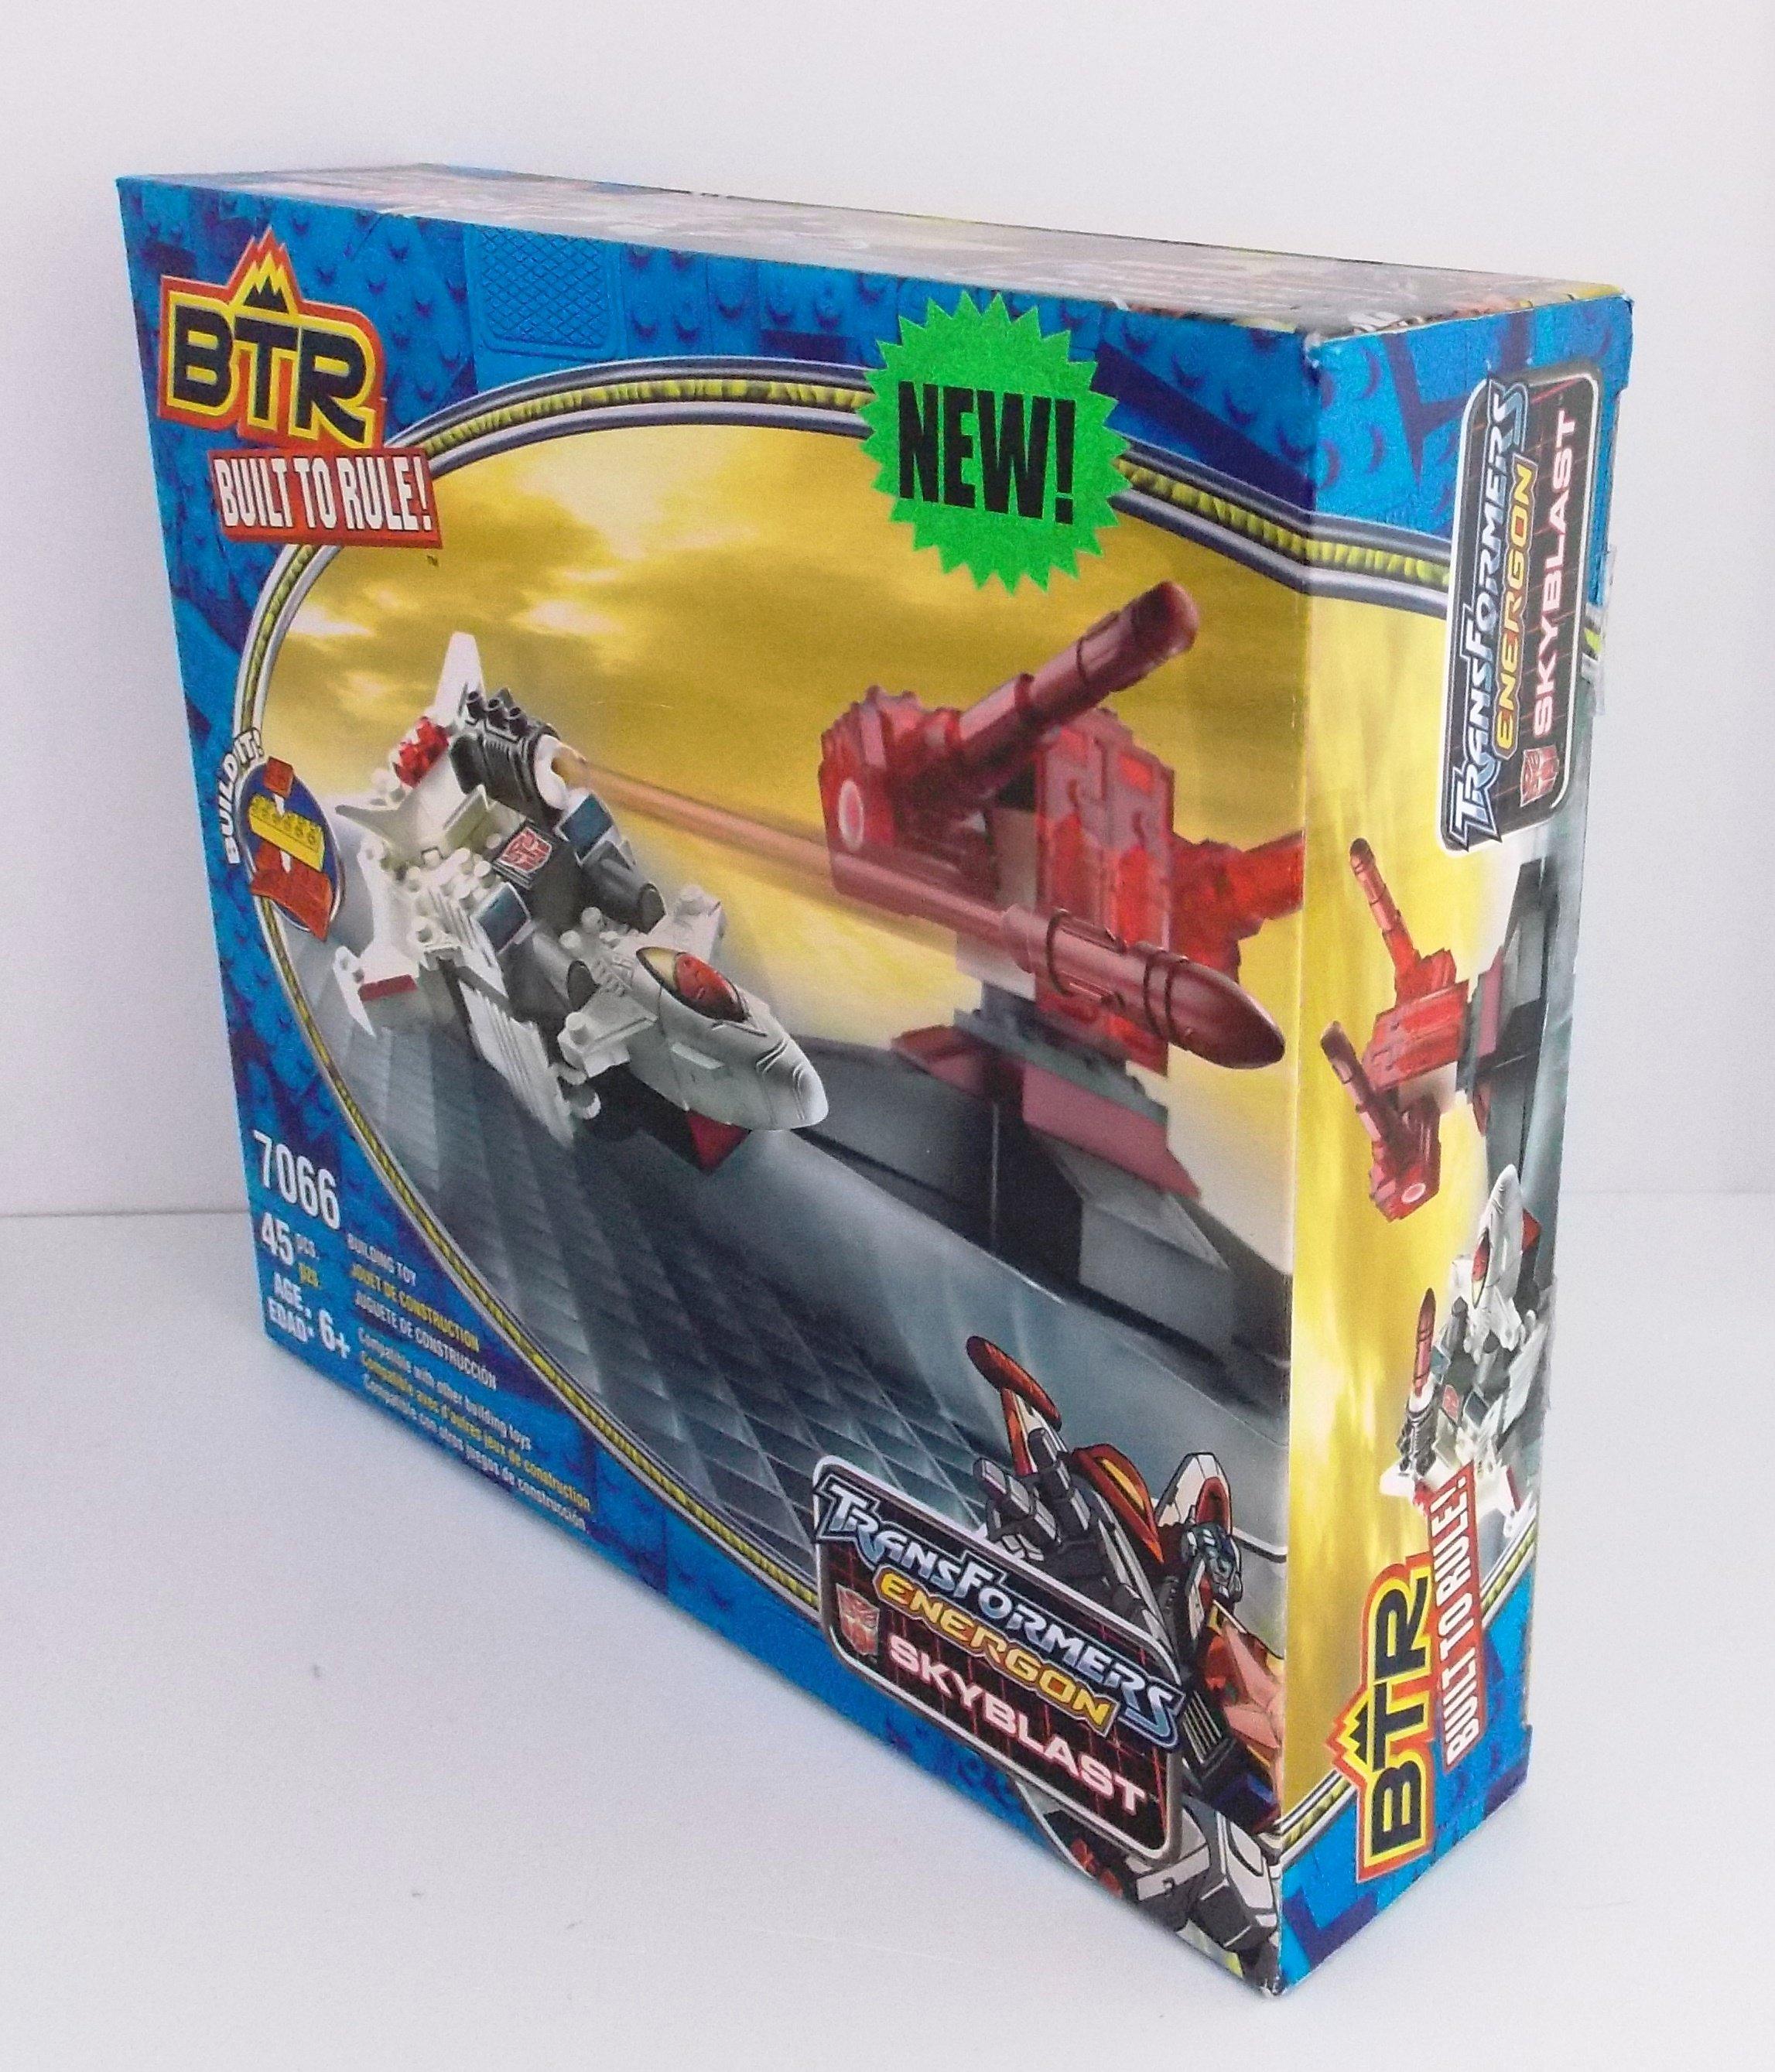 Transformers Built to Rule Skyblast 7066 Building Block System with Firefly